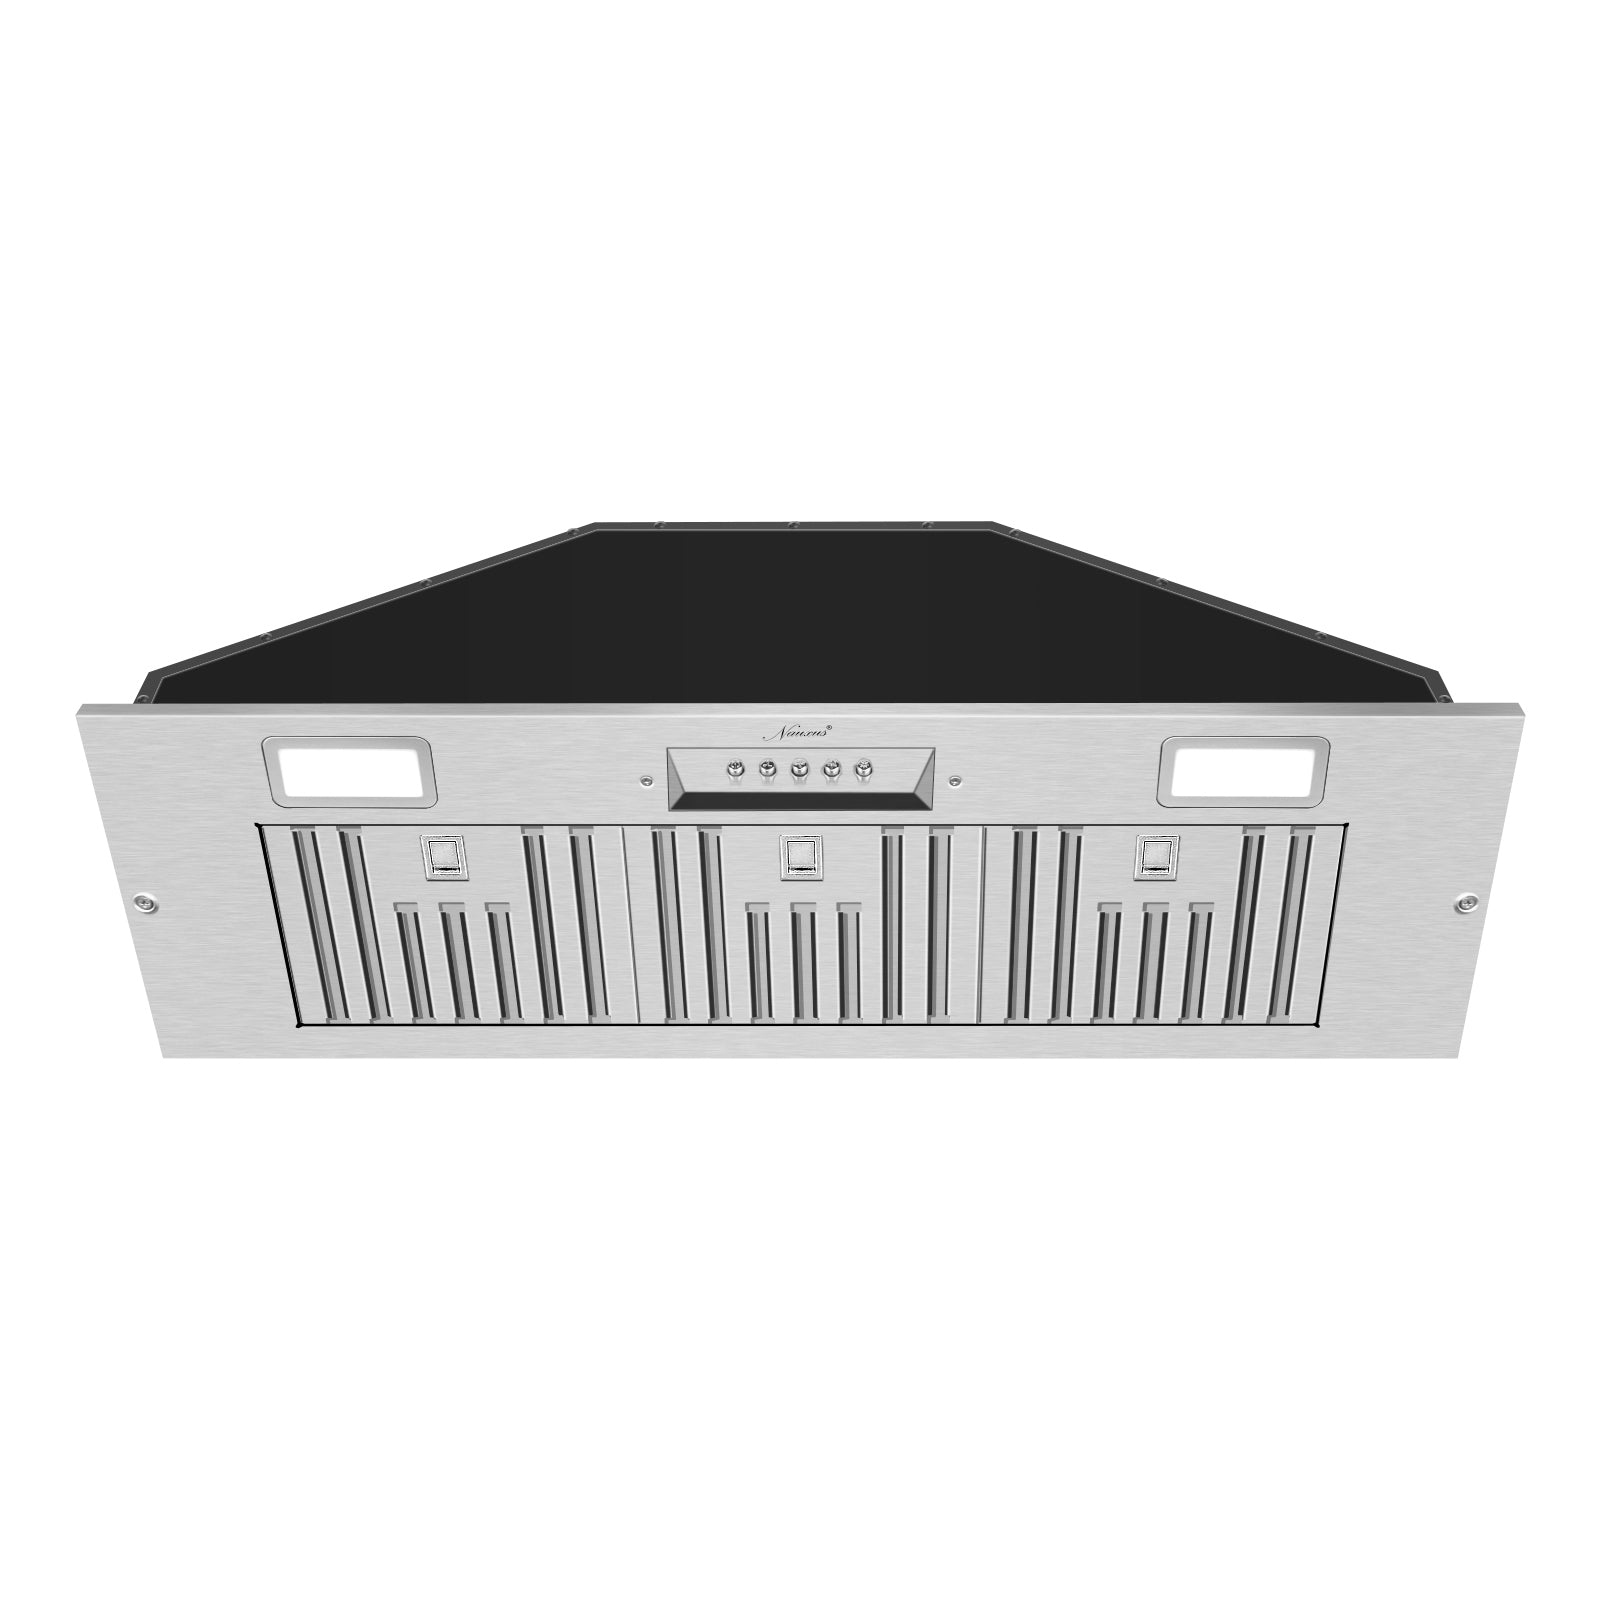 Range Hood Insert/Built-in 36 Inch,Ultra Quiet,Powelful Suction Stainless Steel Ducted Kitchen Vent Hood with LED Lights and Dishwasher Safe Filters, 3-Speeds 600 CFM